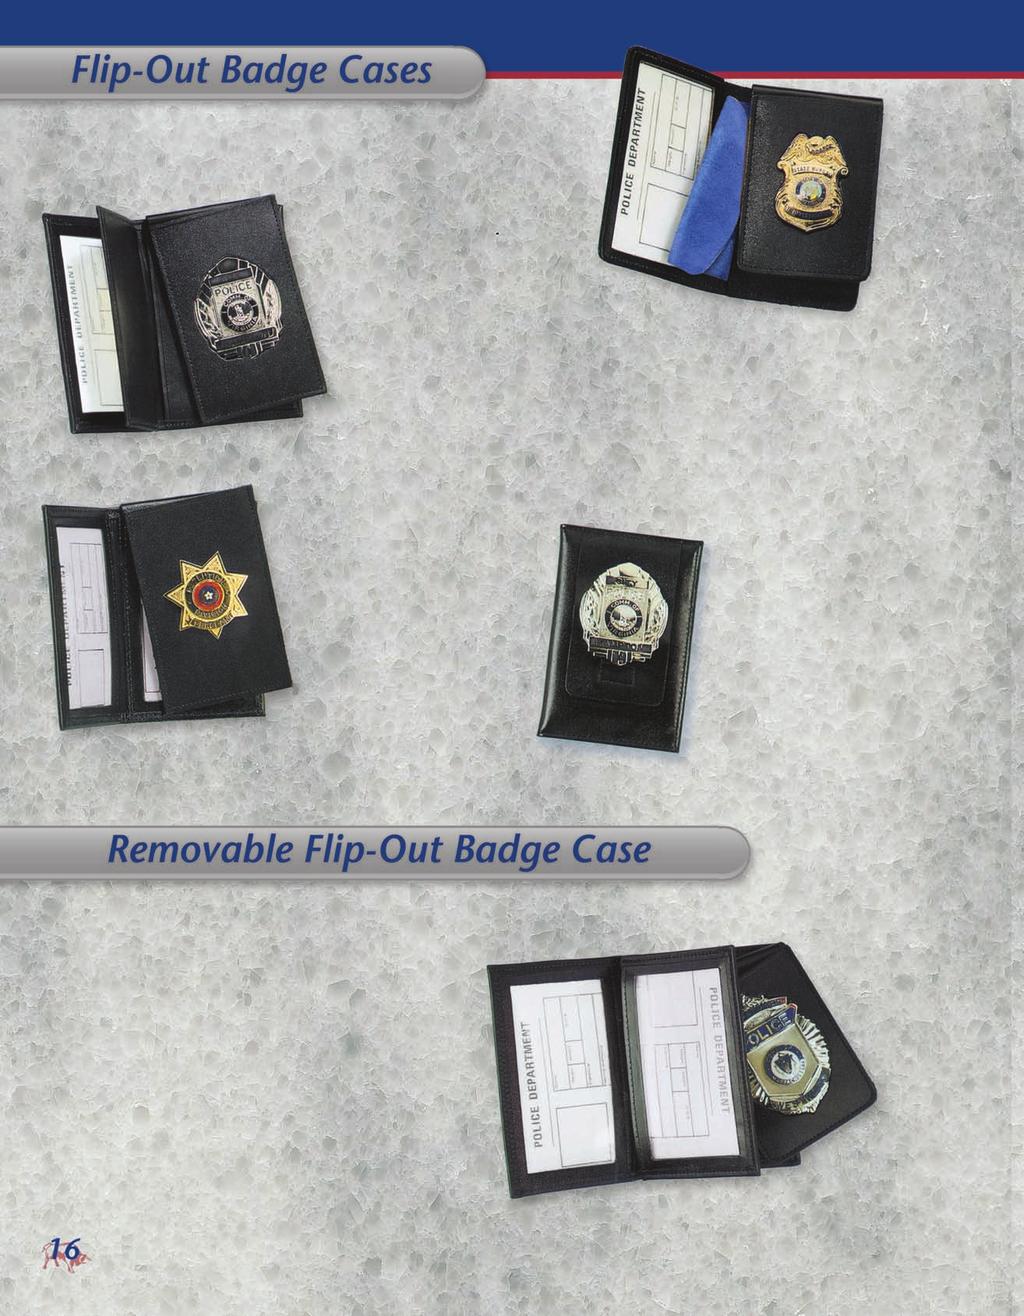 Flip-out cases are designed so you can wear the badge in the breast pocket. All that has to be done is flip the badge flap to the outside of the case to display the badge.